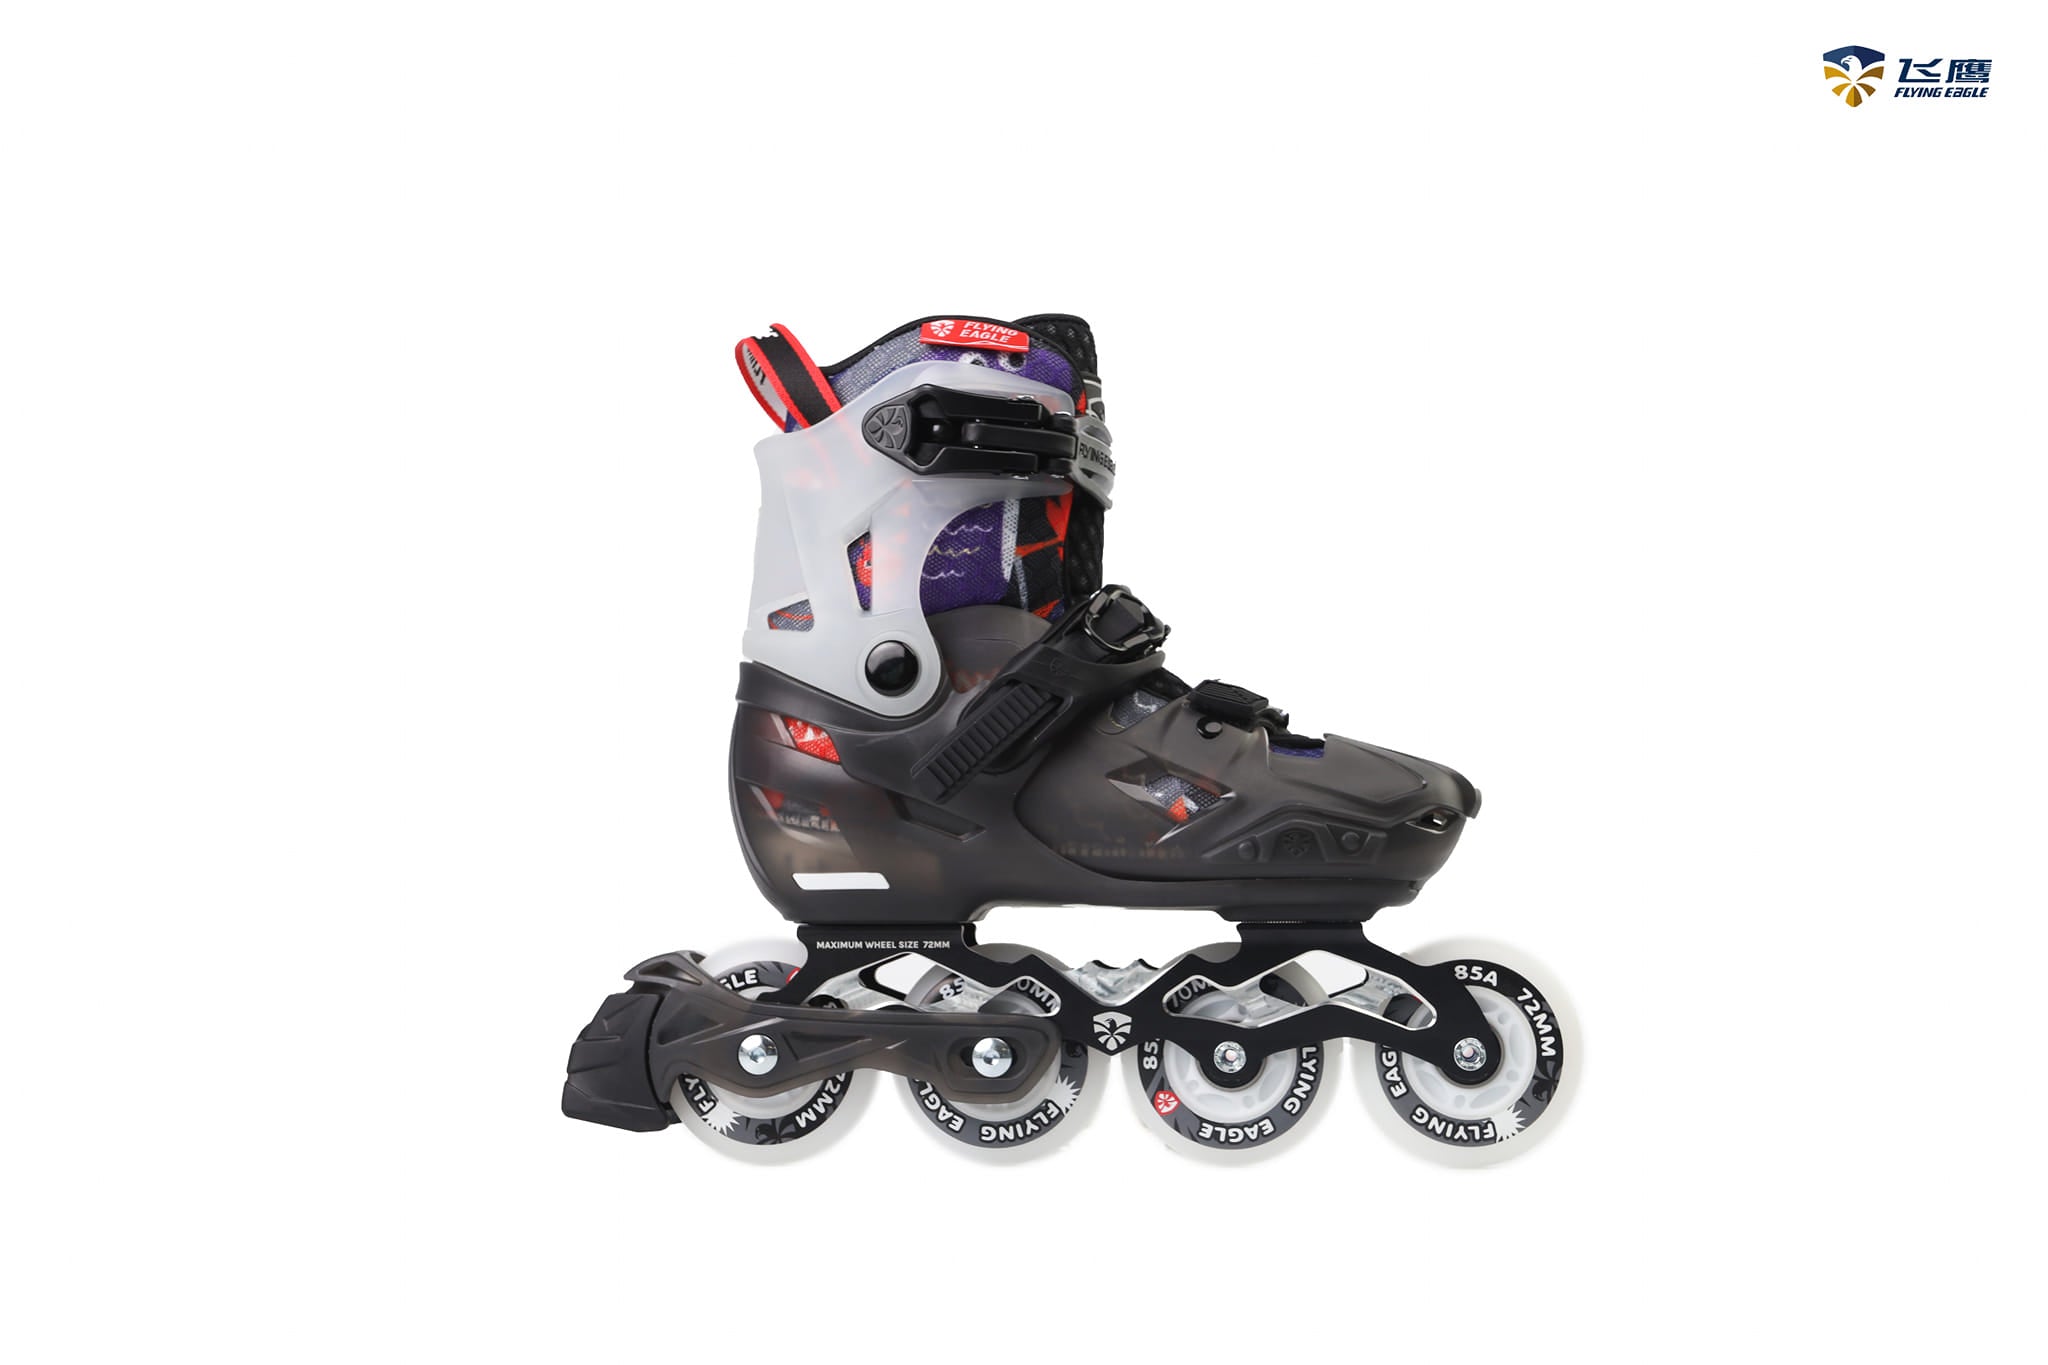 Patines Flying Eagle L8 Sprout patines niños